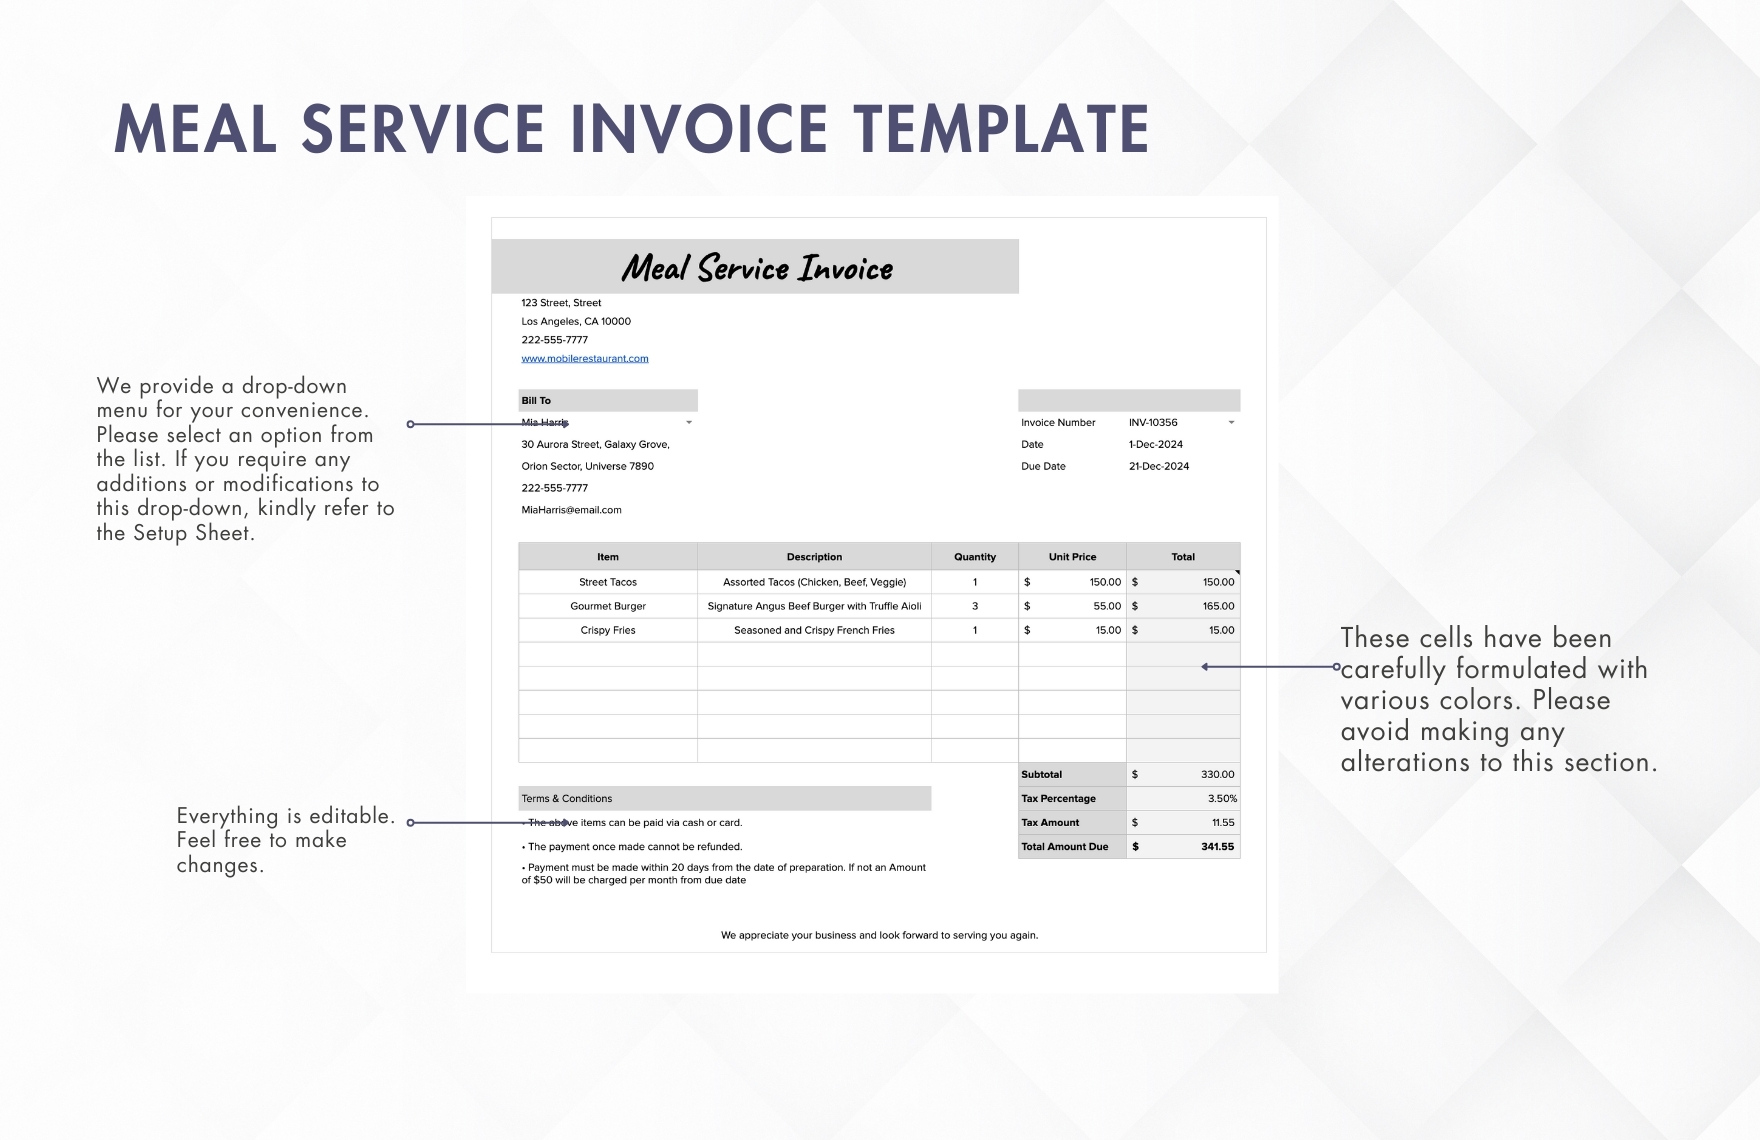 Meal Service Invoice Template